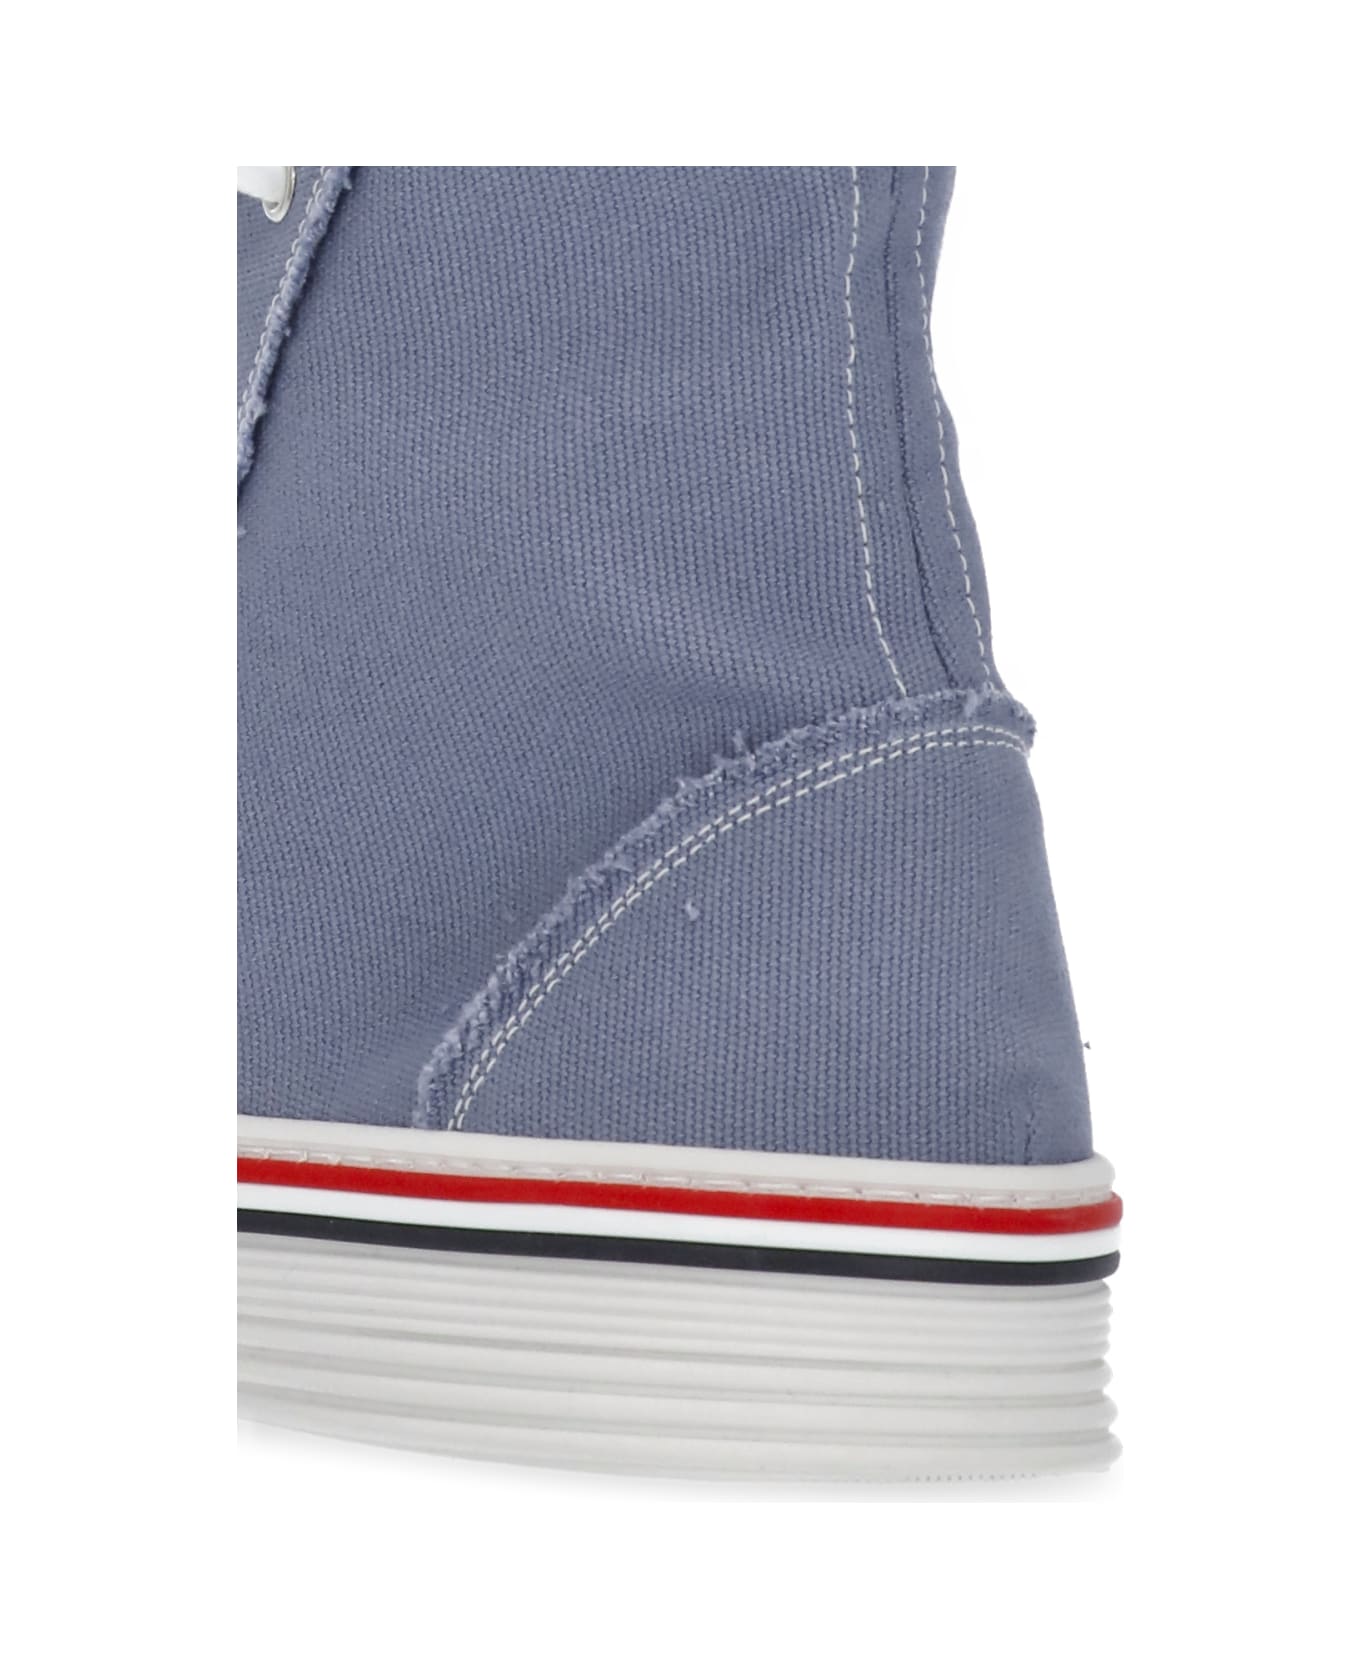 Thom Browne Sneakers In Light Blue Canvas - Light Blue